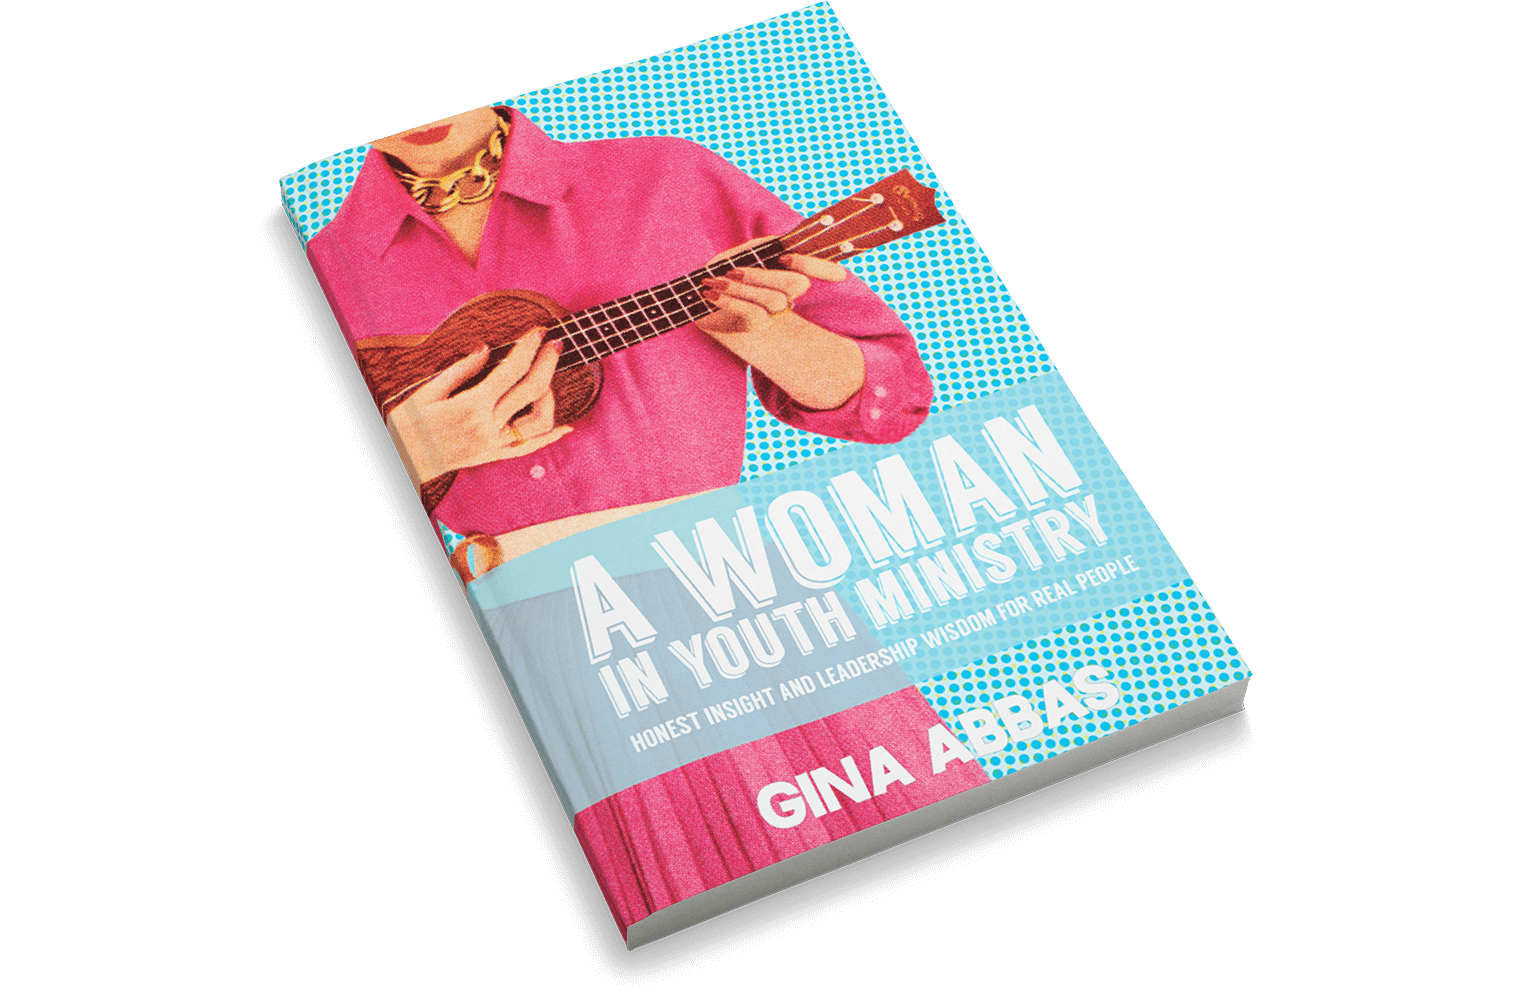 A Woman in Youth Ministry: Honest Insight and Leadership Wisdom for Real People